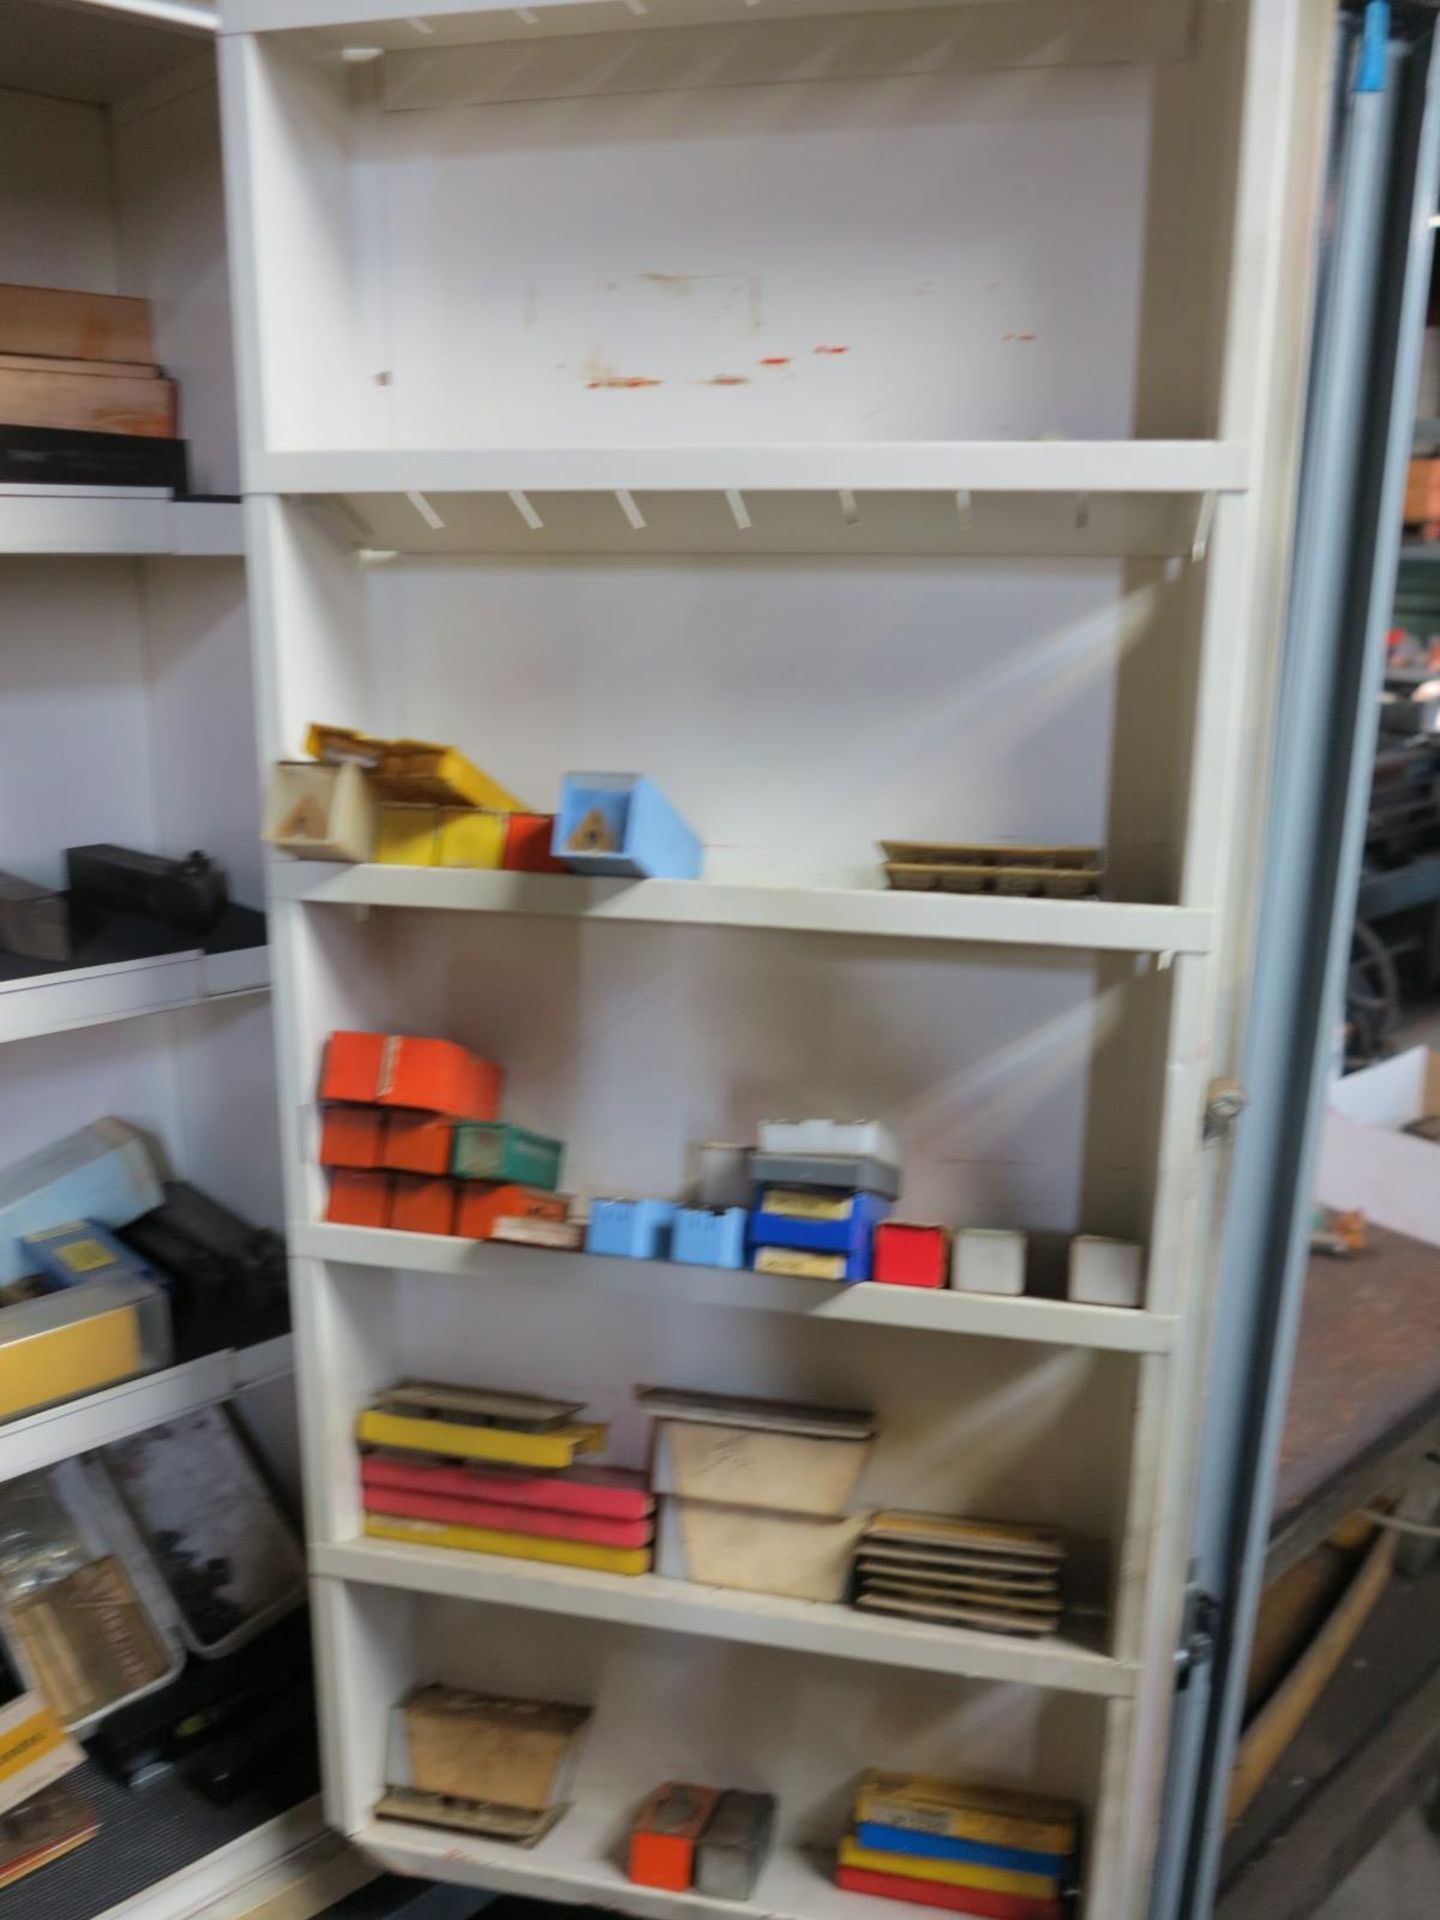 LOT - SMALL 2-DOOR CABINET FULL OF LATHE TOOLING, INSERTS, 5C COLLETS, BORING BARS, ETC. - Image 3 of 5